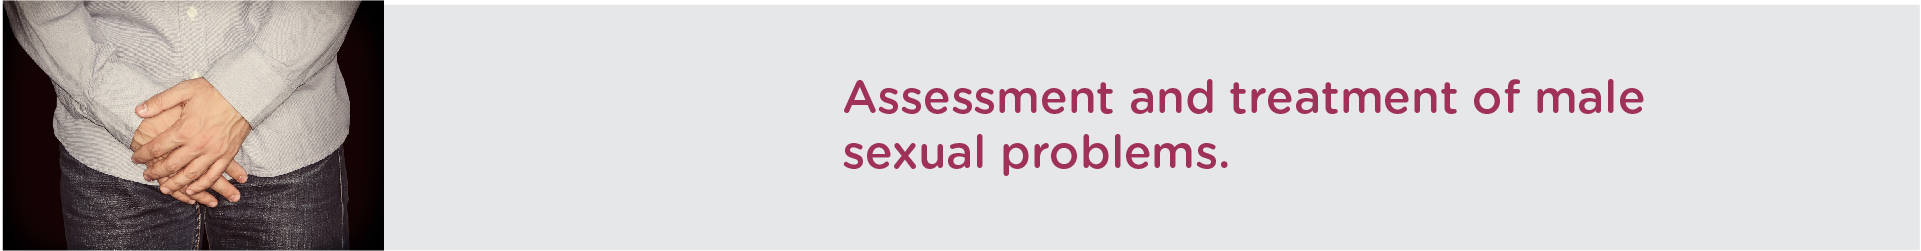 What are the assessment and Medical Treatment For Male Sexual Problems